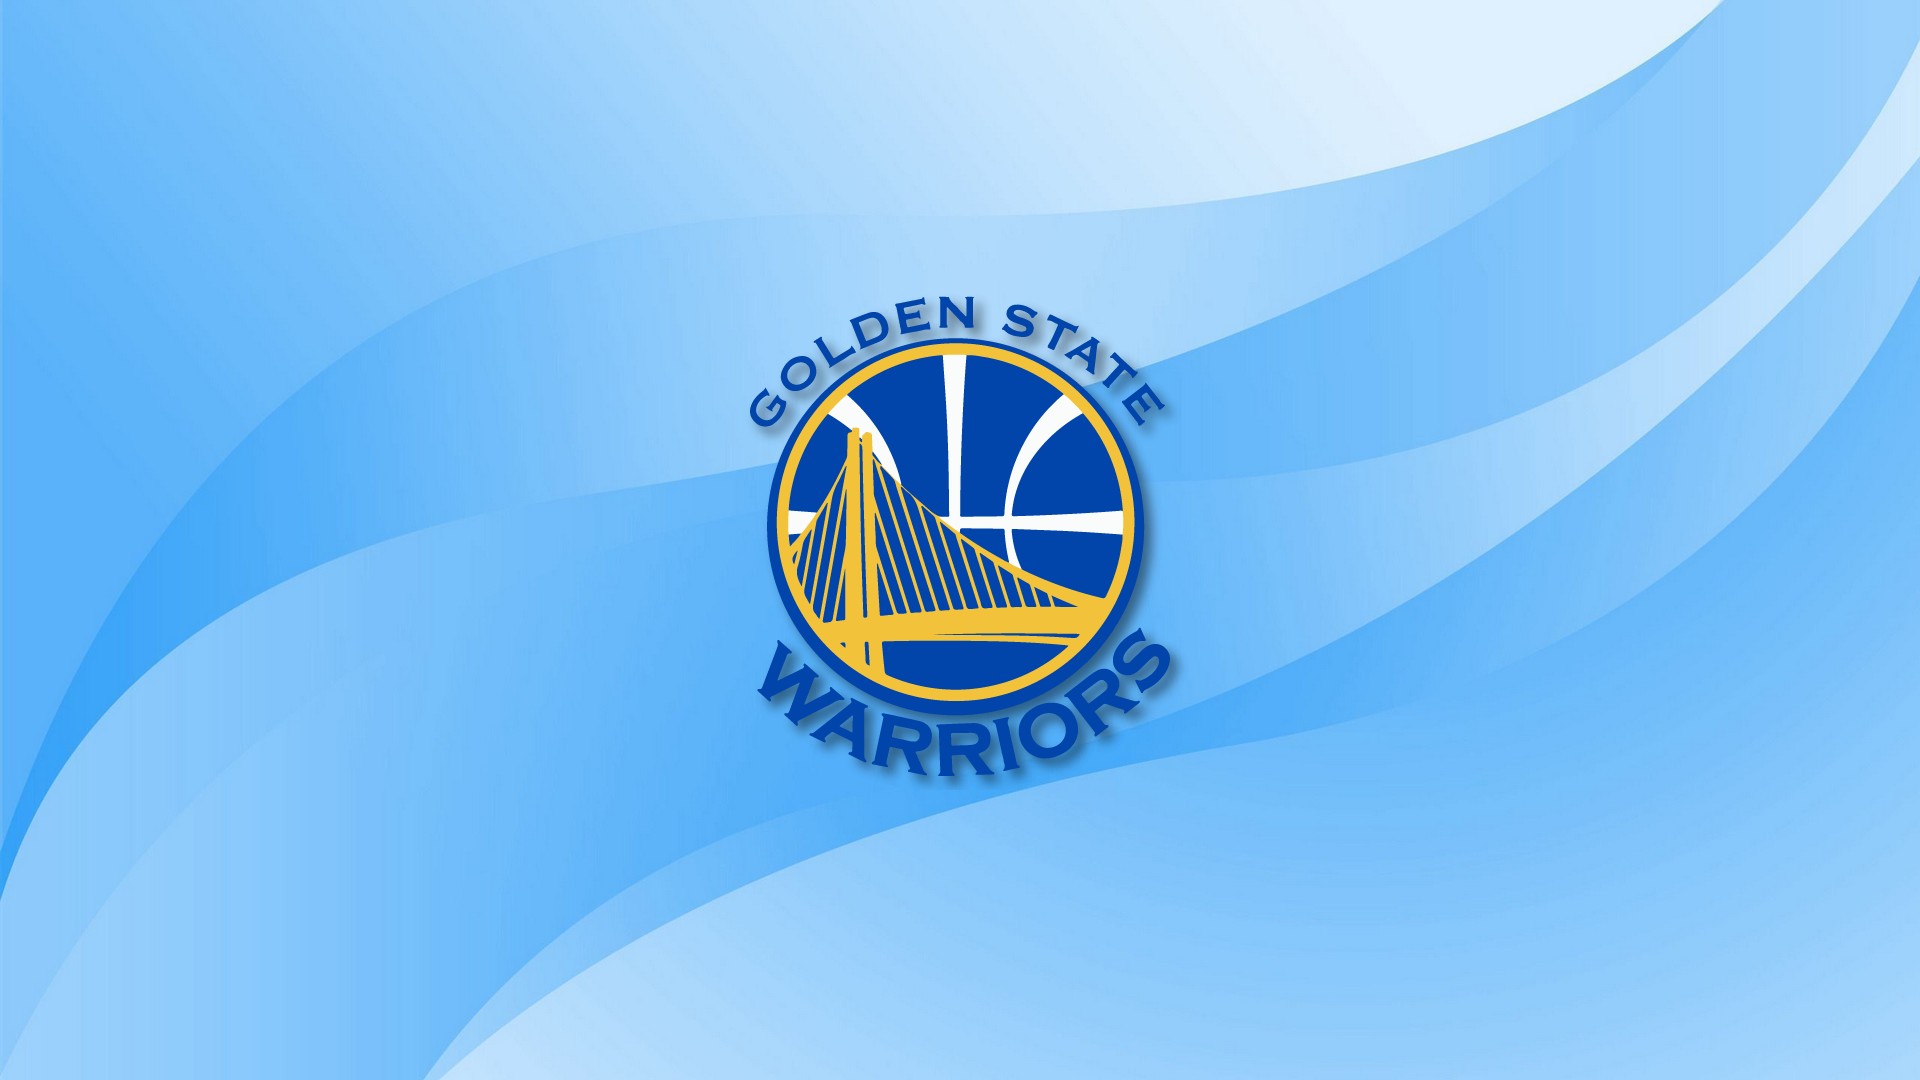 Golden State Warriors Logo For Desktop Wallpaper with image dimensions 1920x1080 pixel. You can make this wallpaper for your Desktop Computer Backgrounds, Windows or Mac Screensavers, iPhone Lock screen, Tablet or Android and another Mobile Phone device